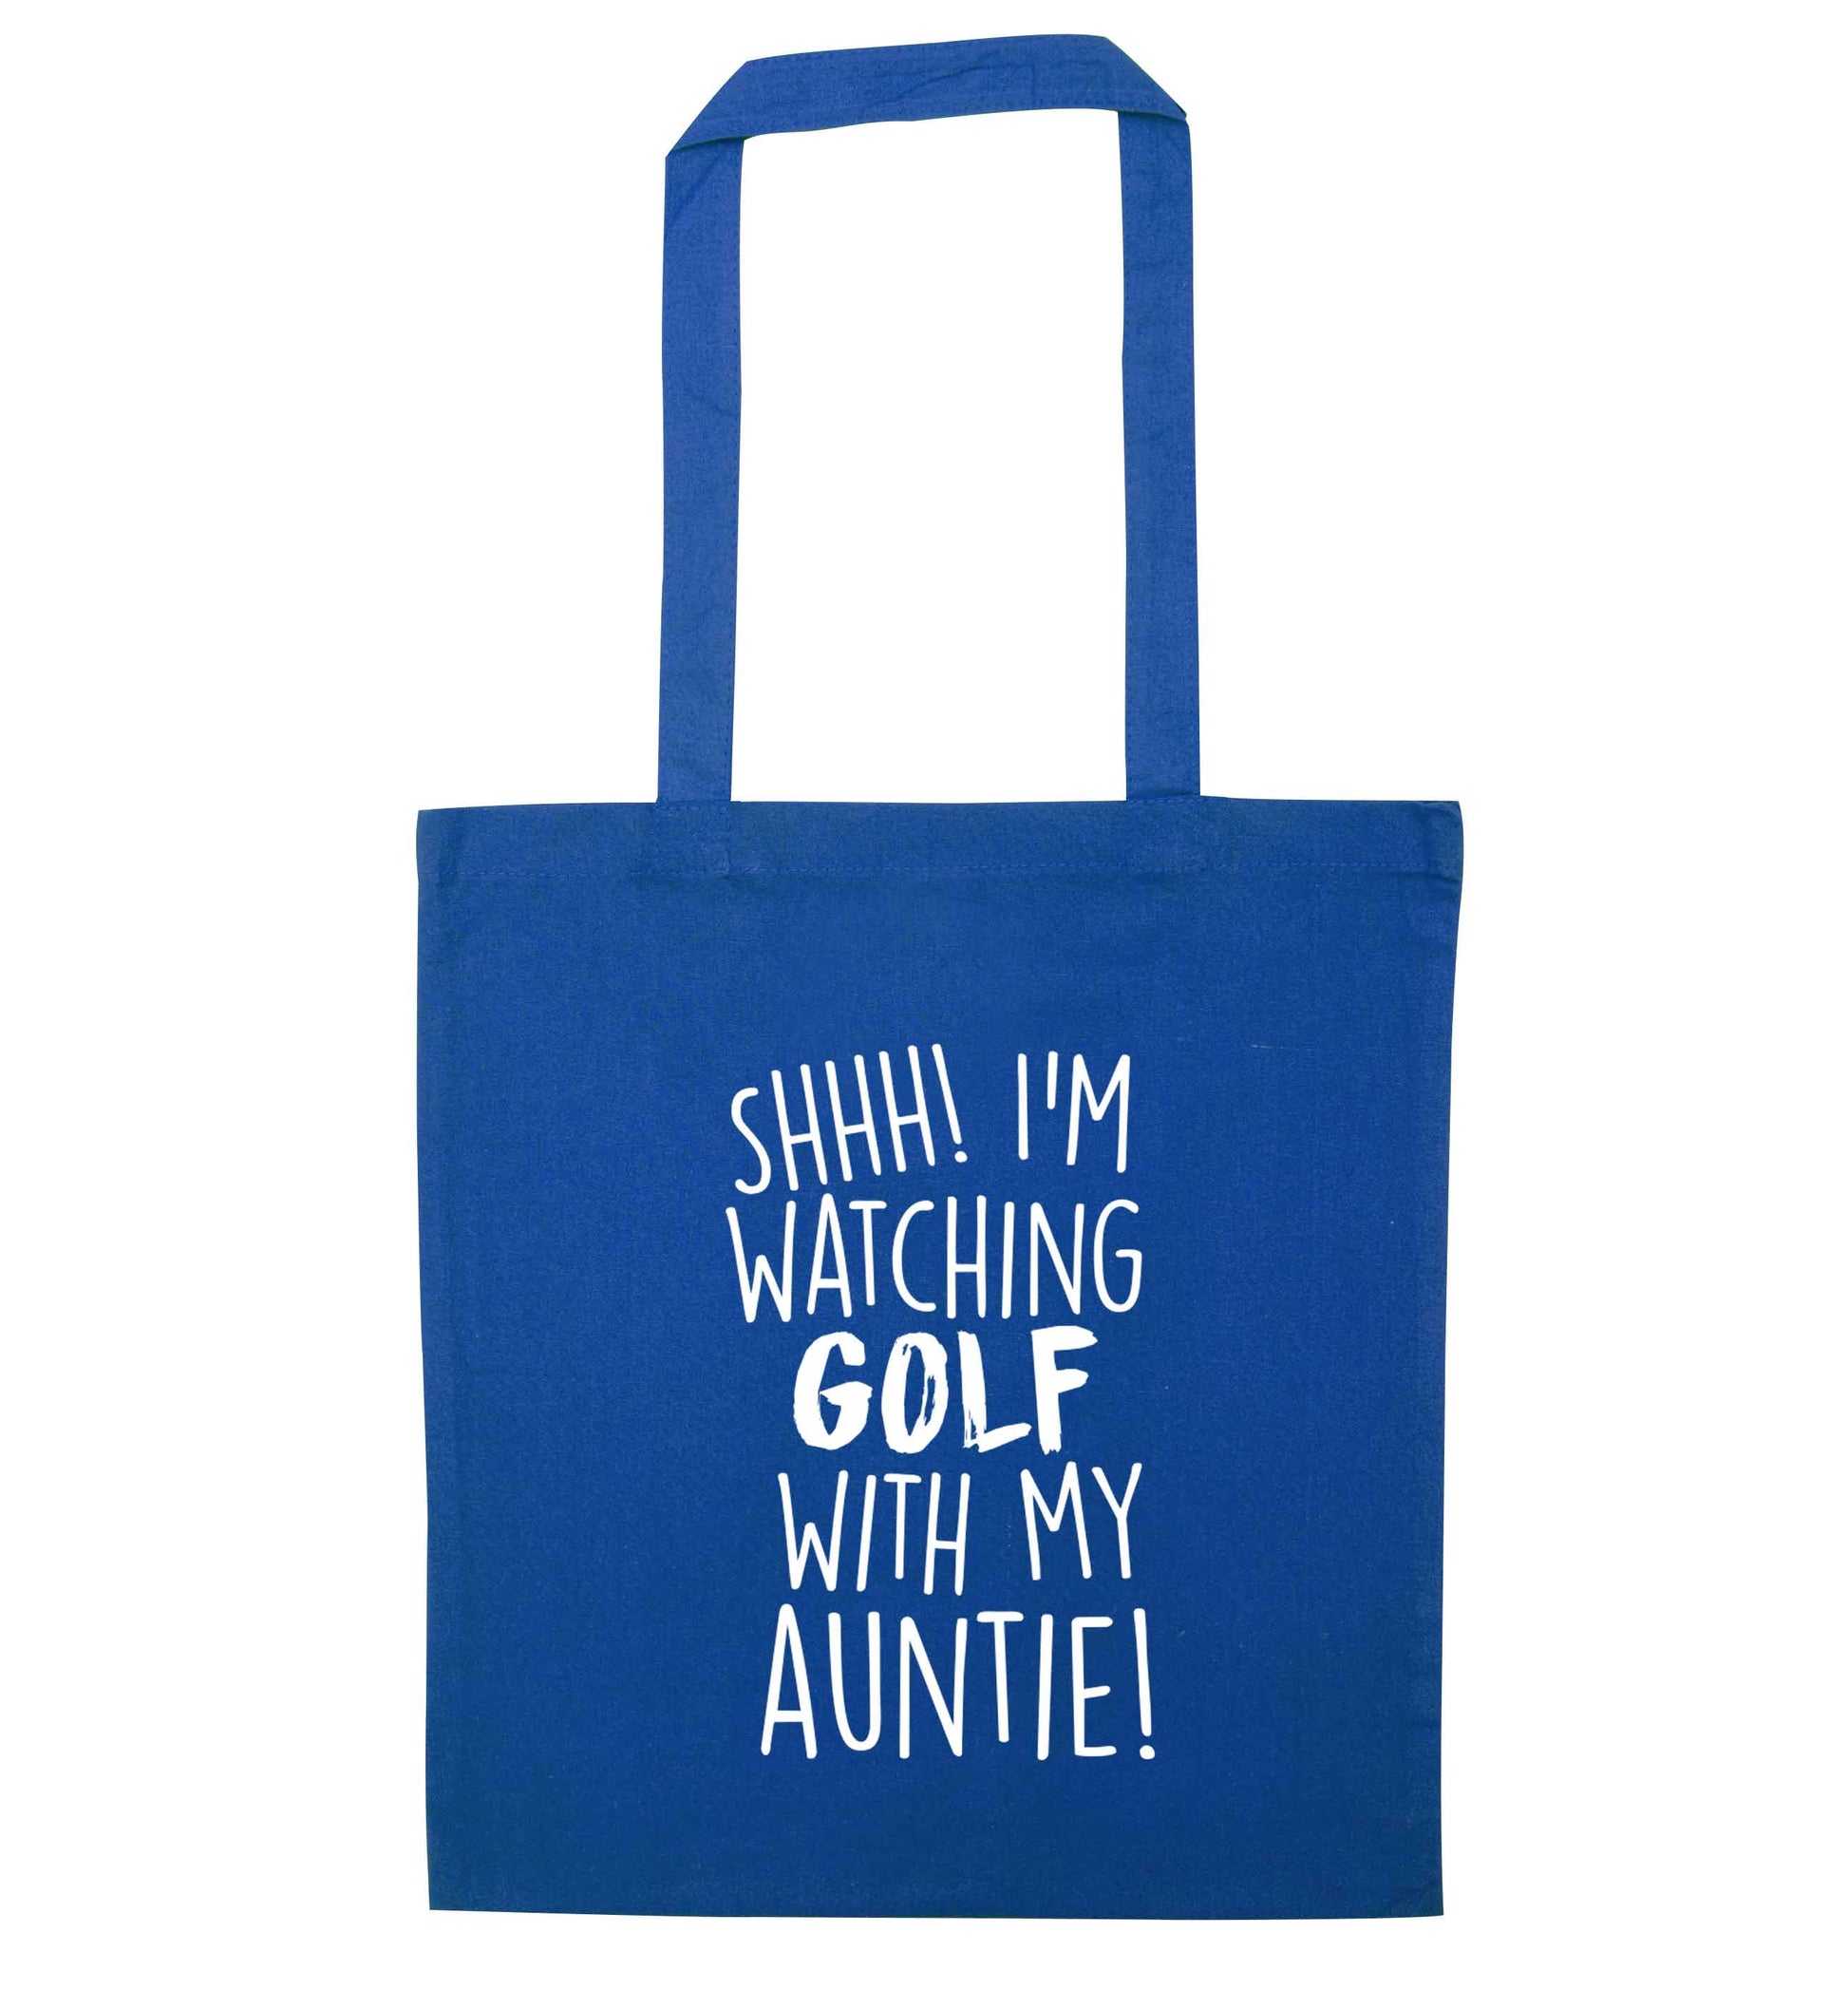 Shh I'm watching golf with my auntie blue tote bag